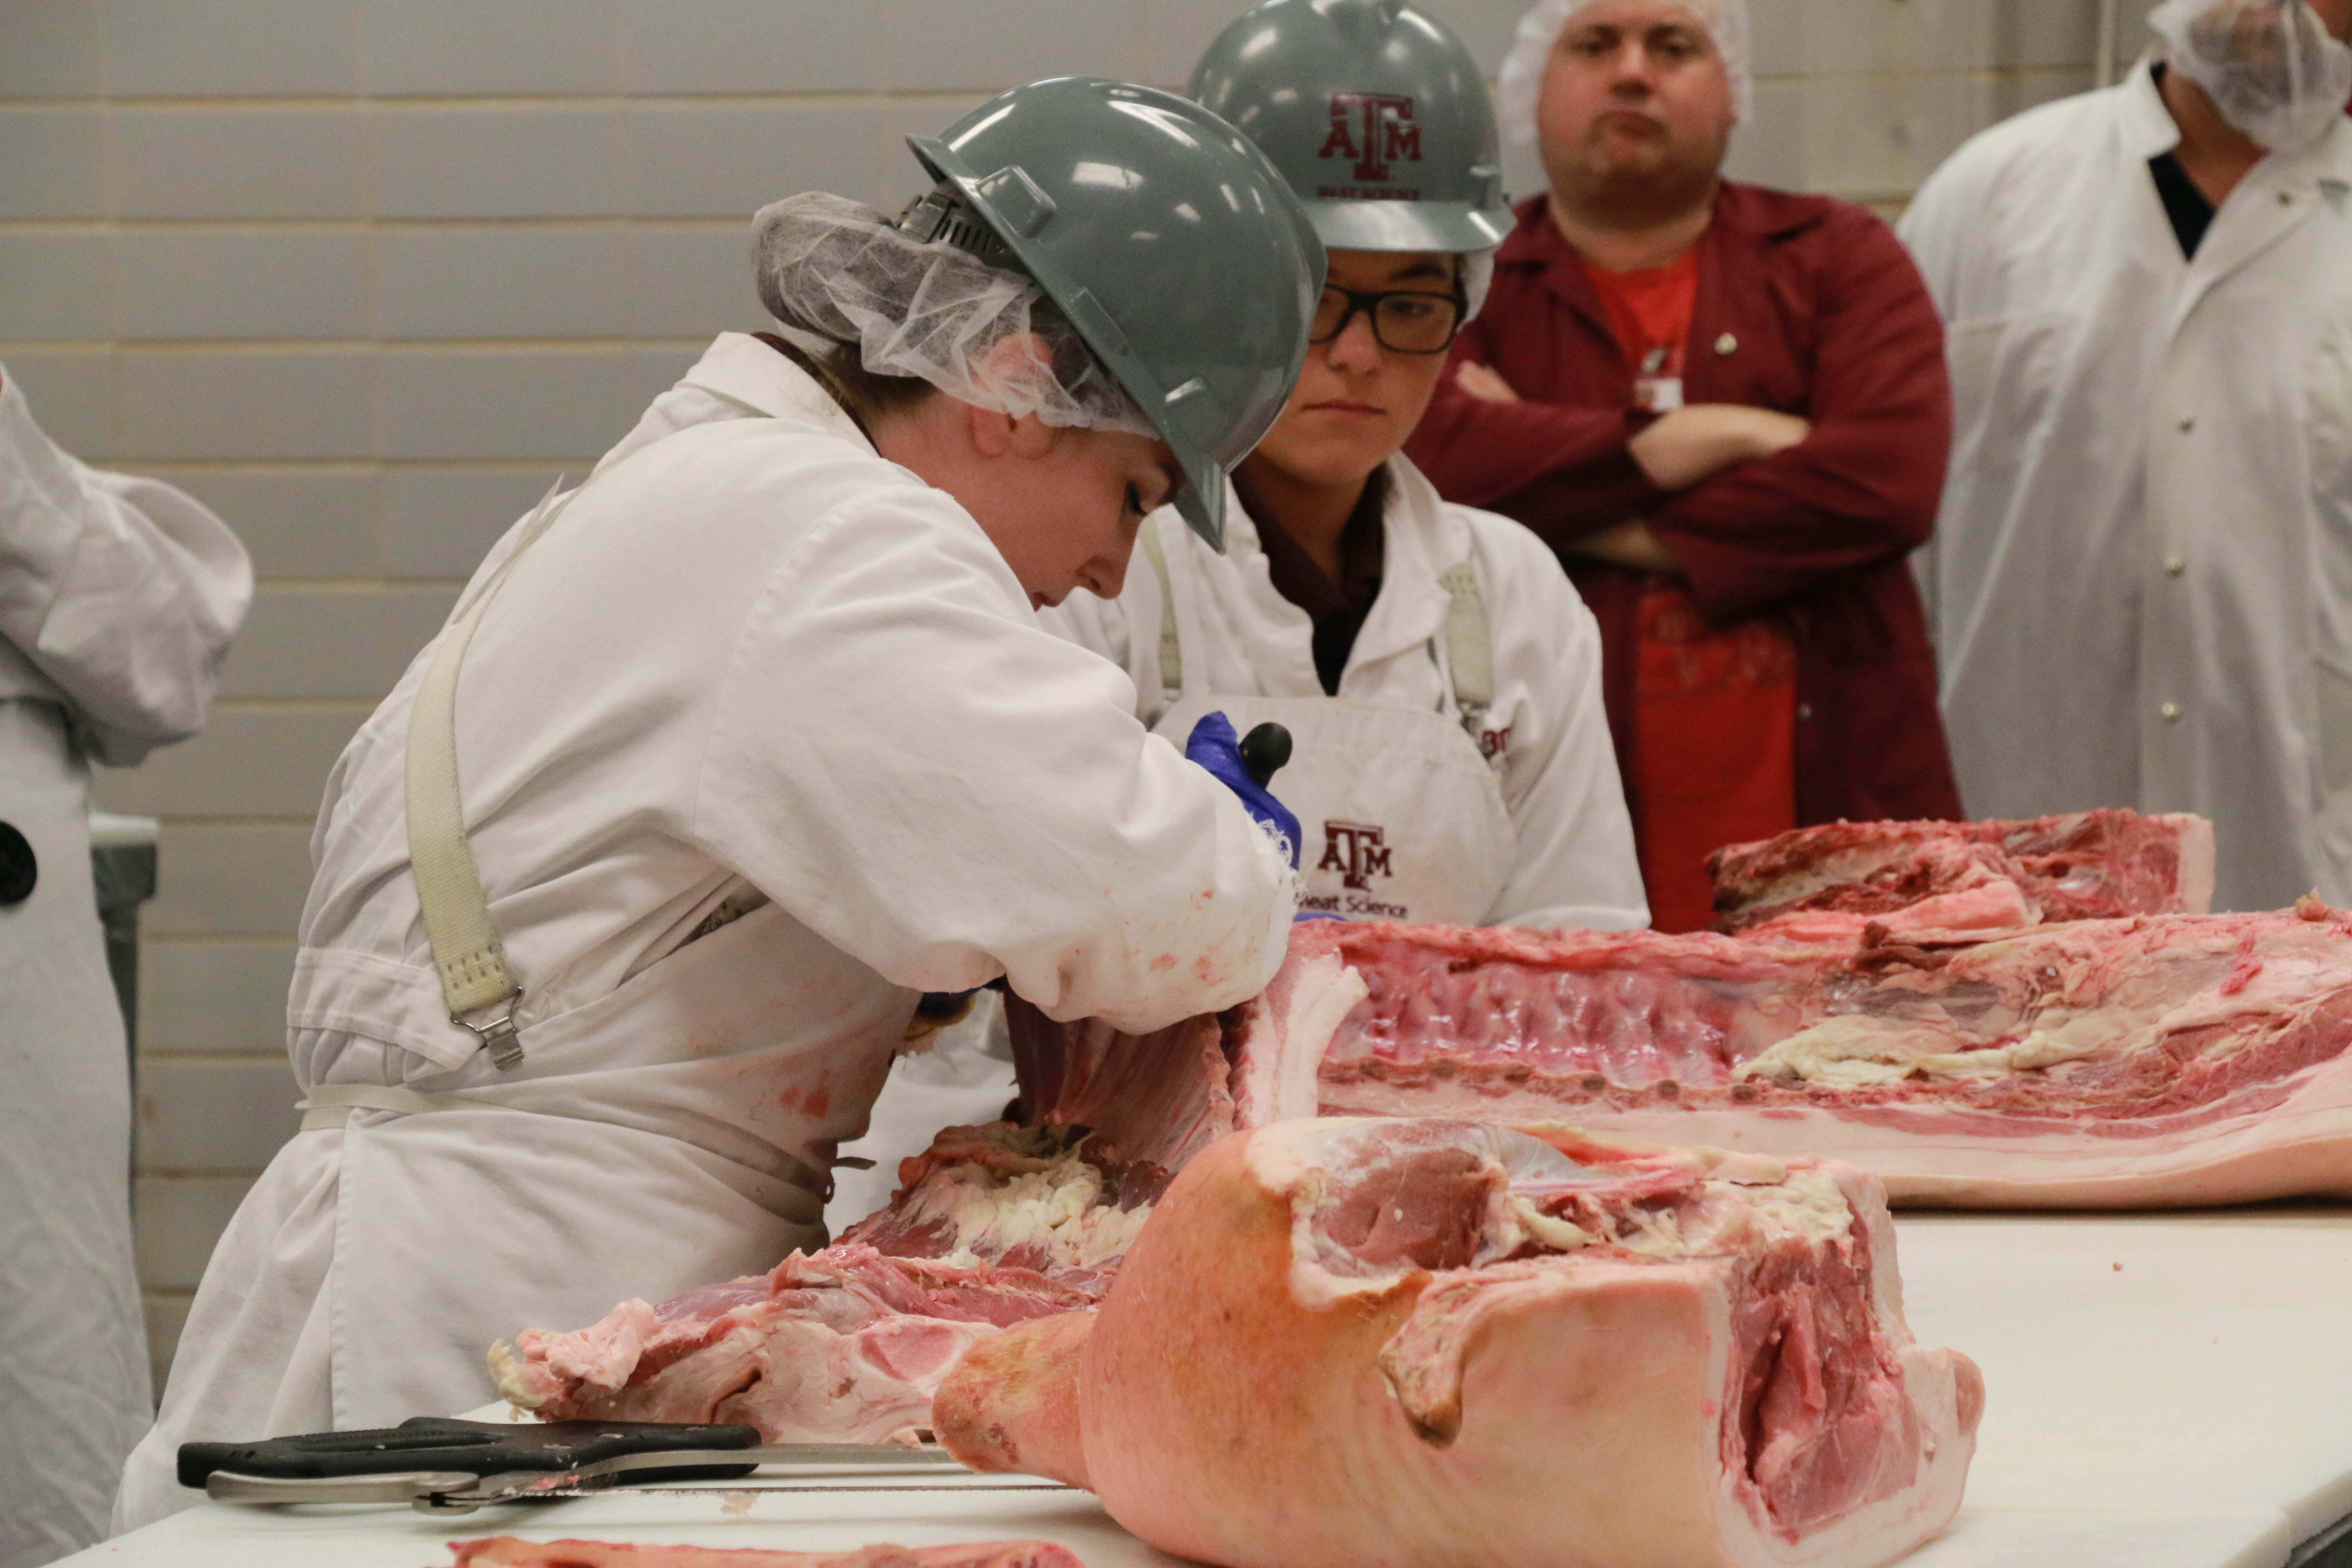 Clay Eastwood and Chandler Steele breaking down a pork carcass